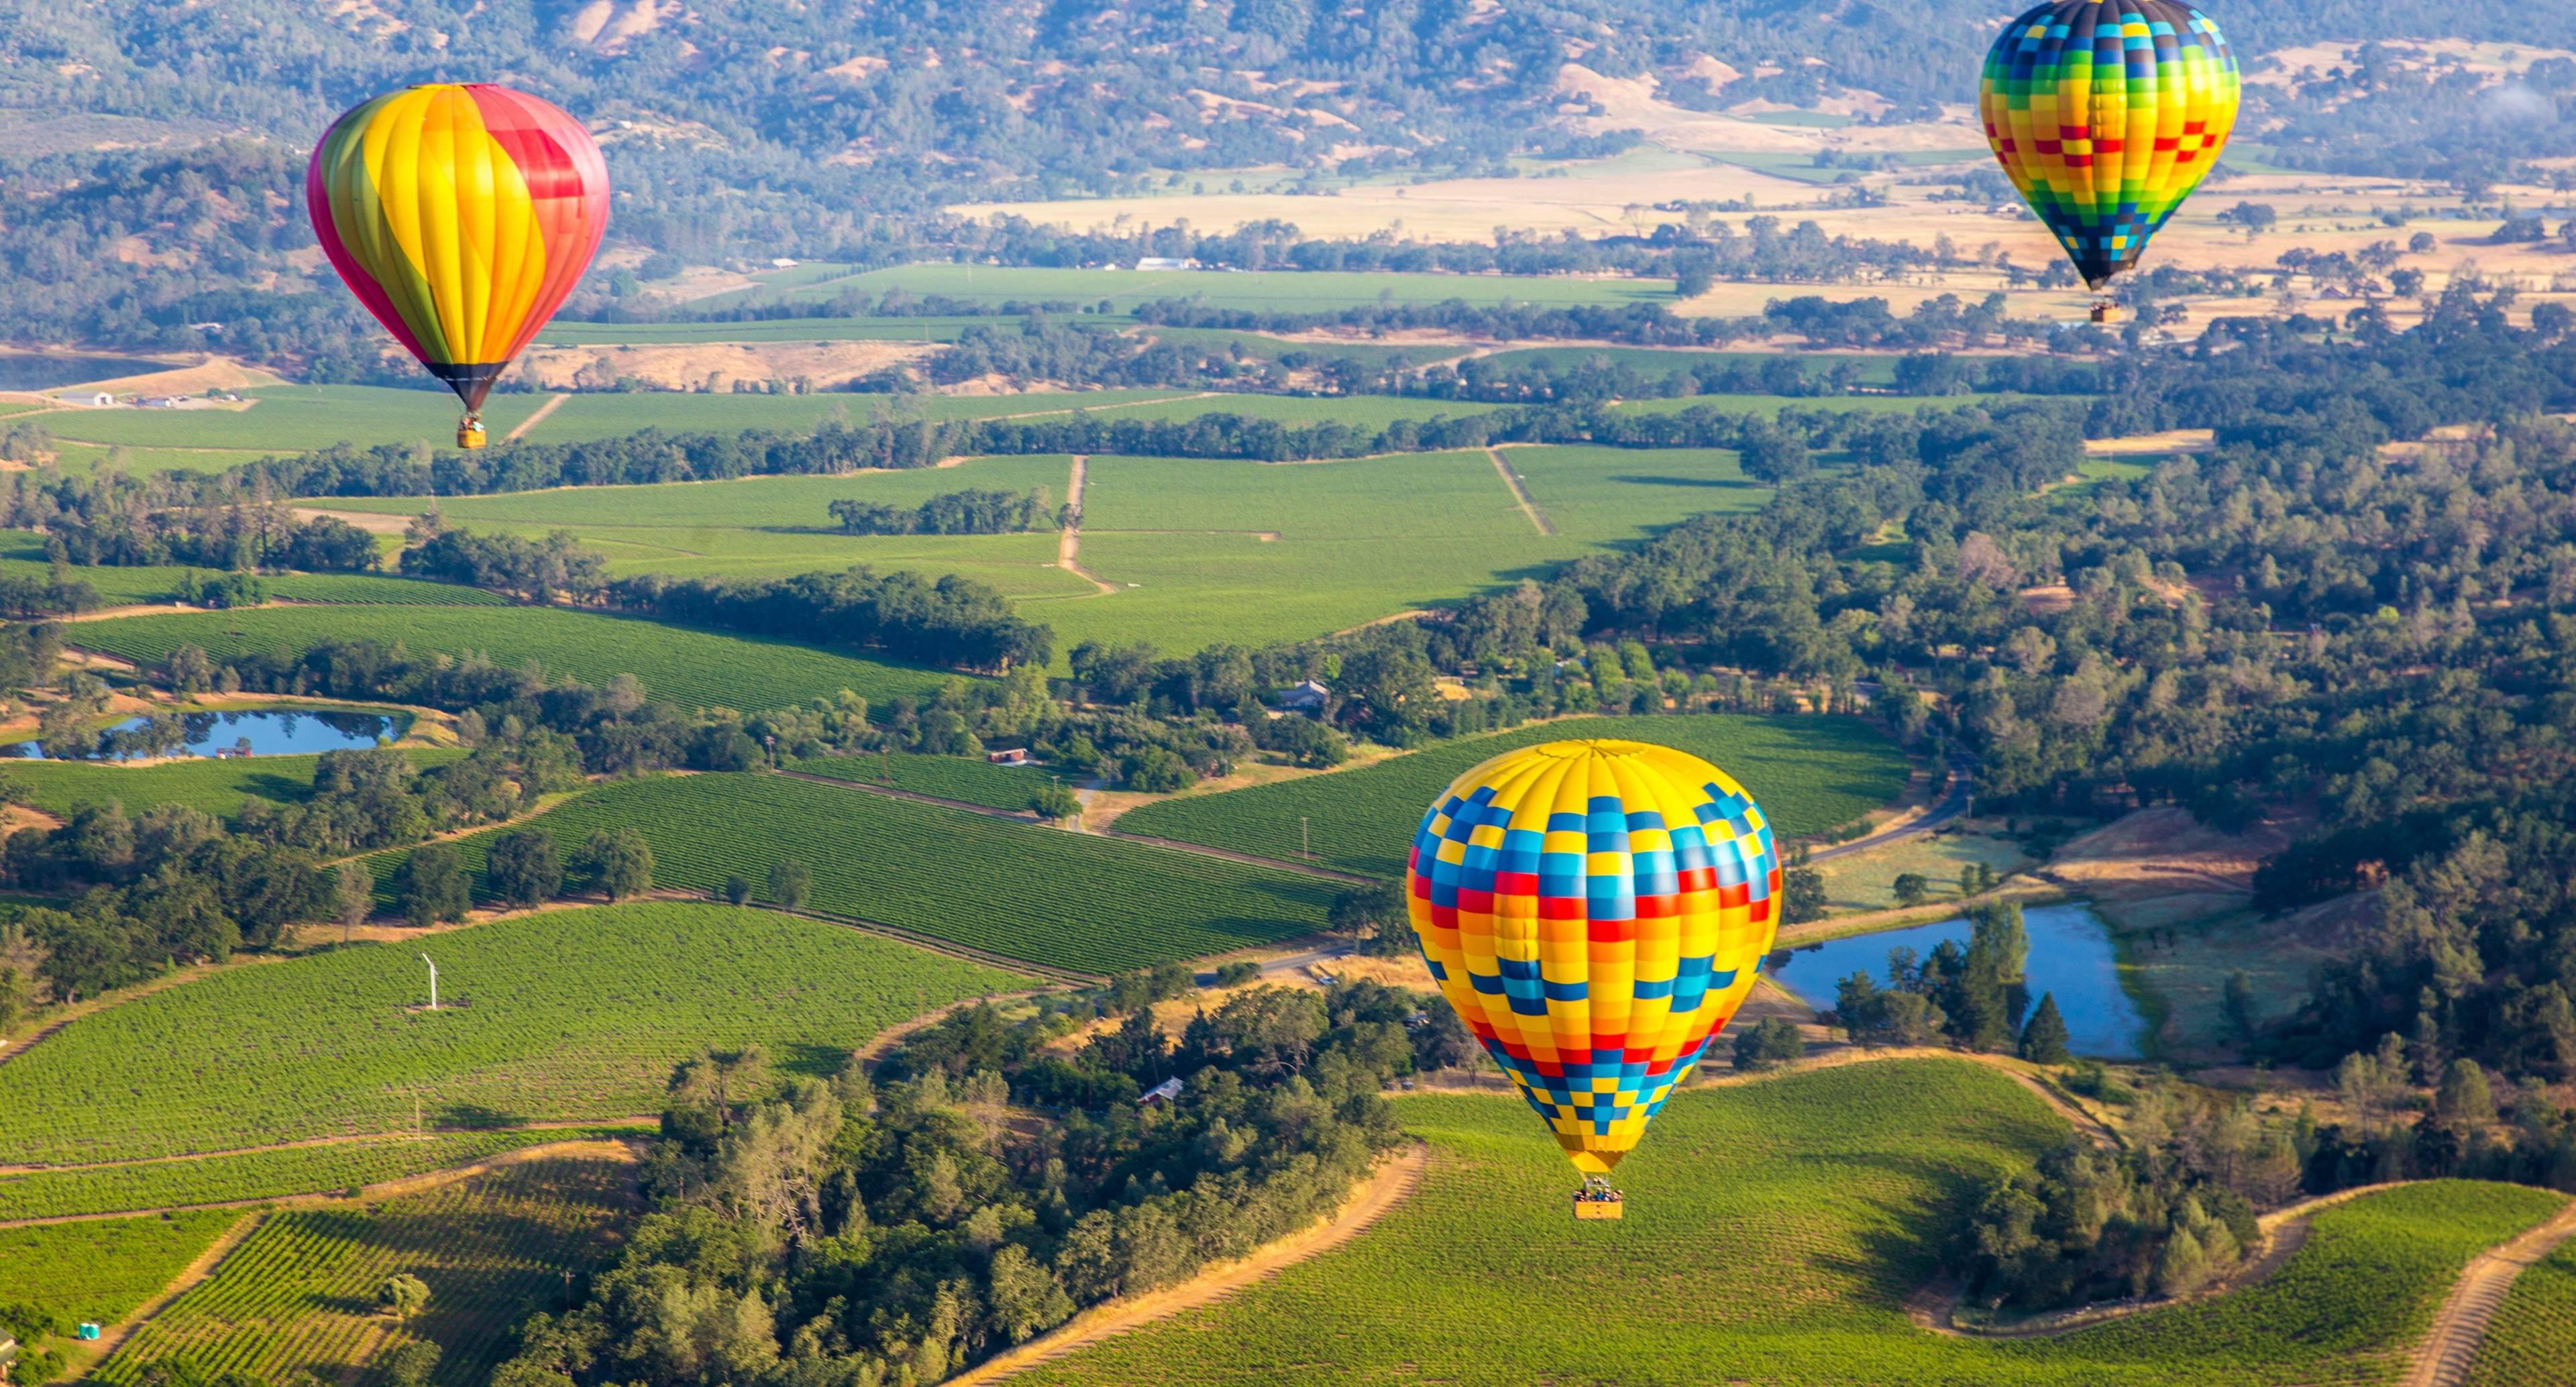 Napa Valley 101: Legacy Wineries, a Baloon Ride, and French Cuisine